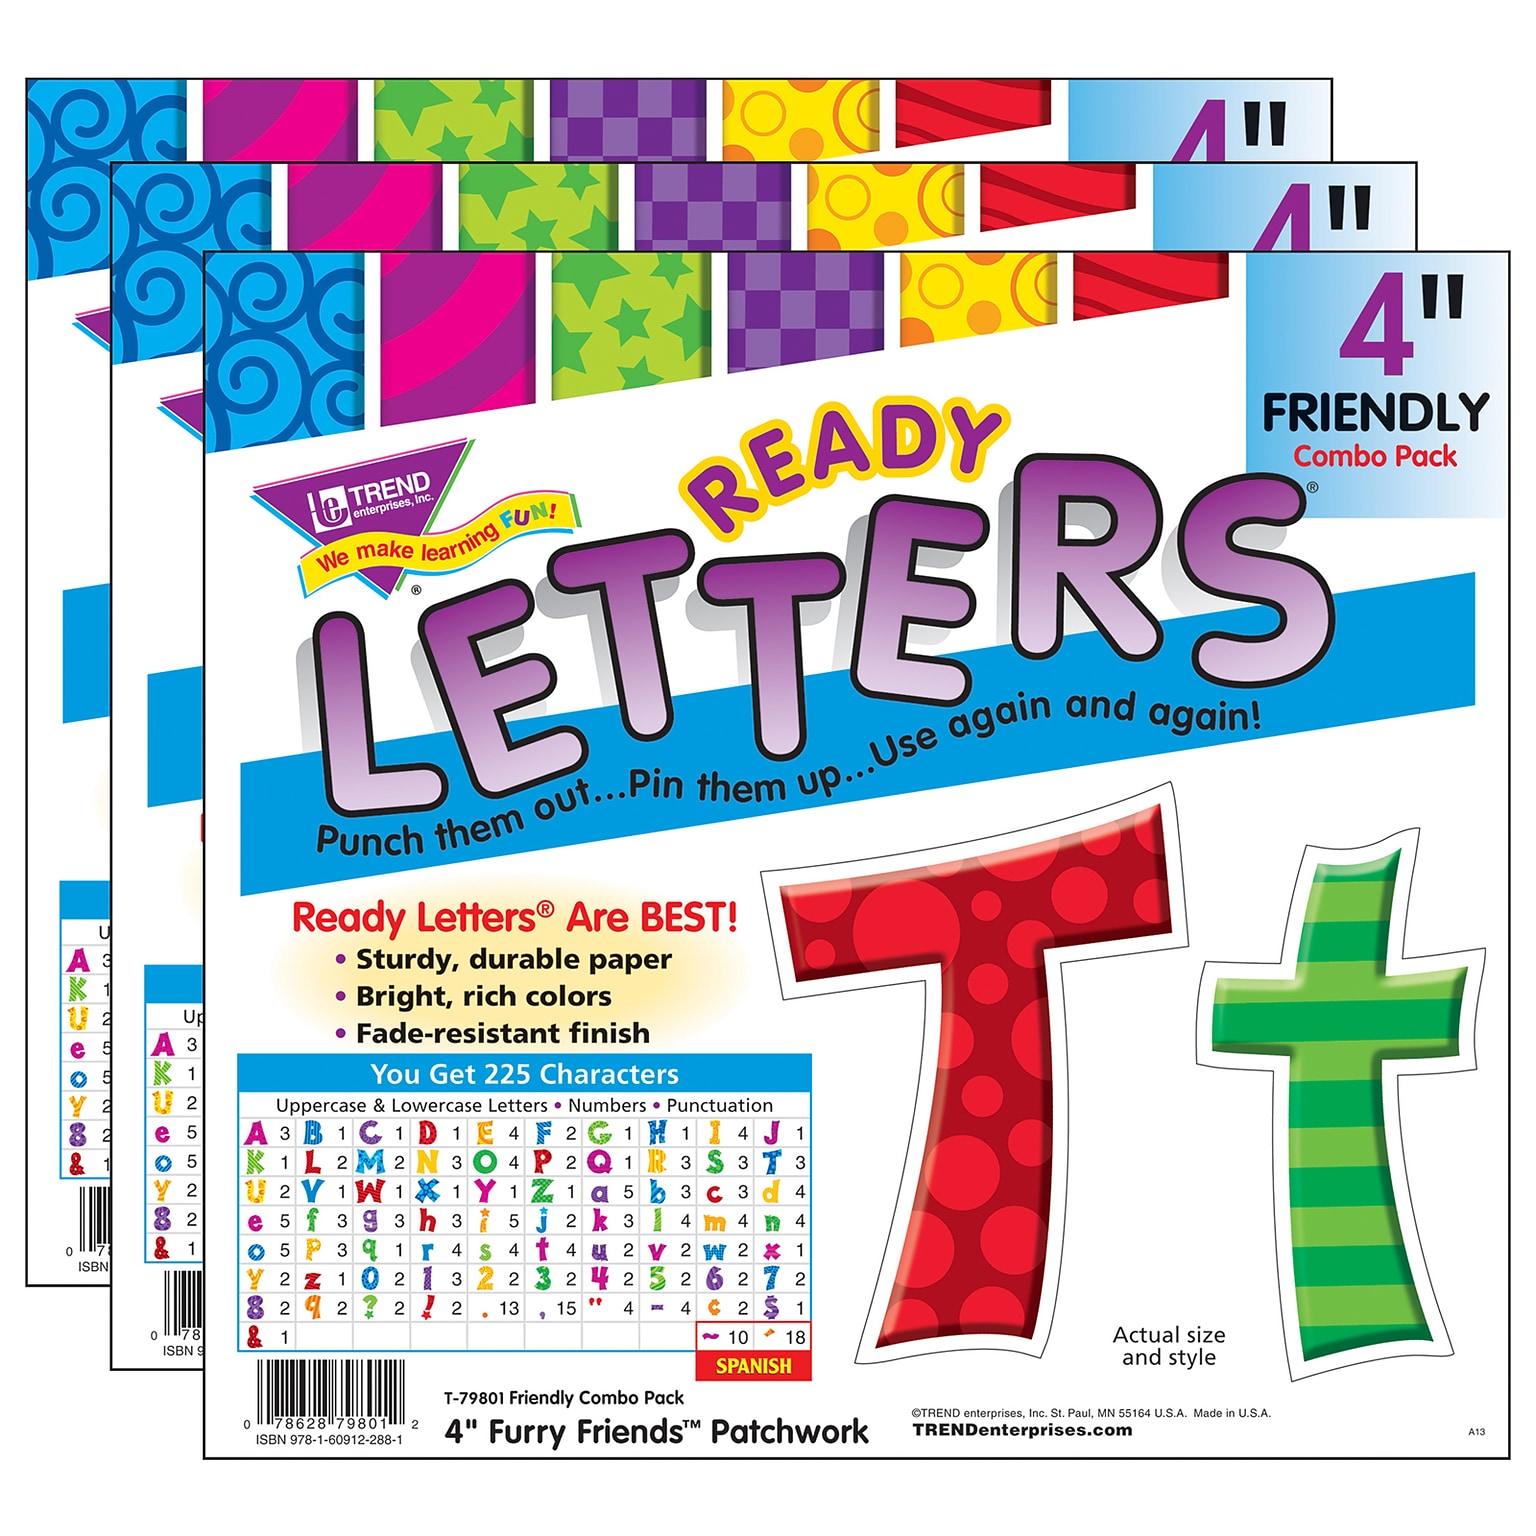 TREND 4 Patchwork Furry Friends Friendly Combo Ready Letters, Multicolored, 225/Pack, 3 Packs (T-79801-3)